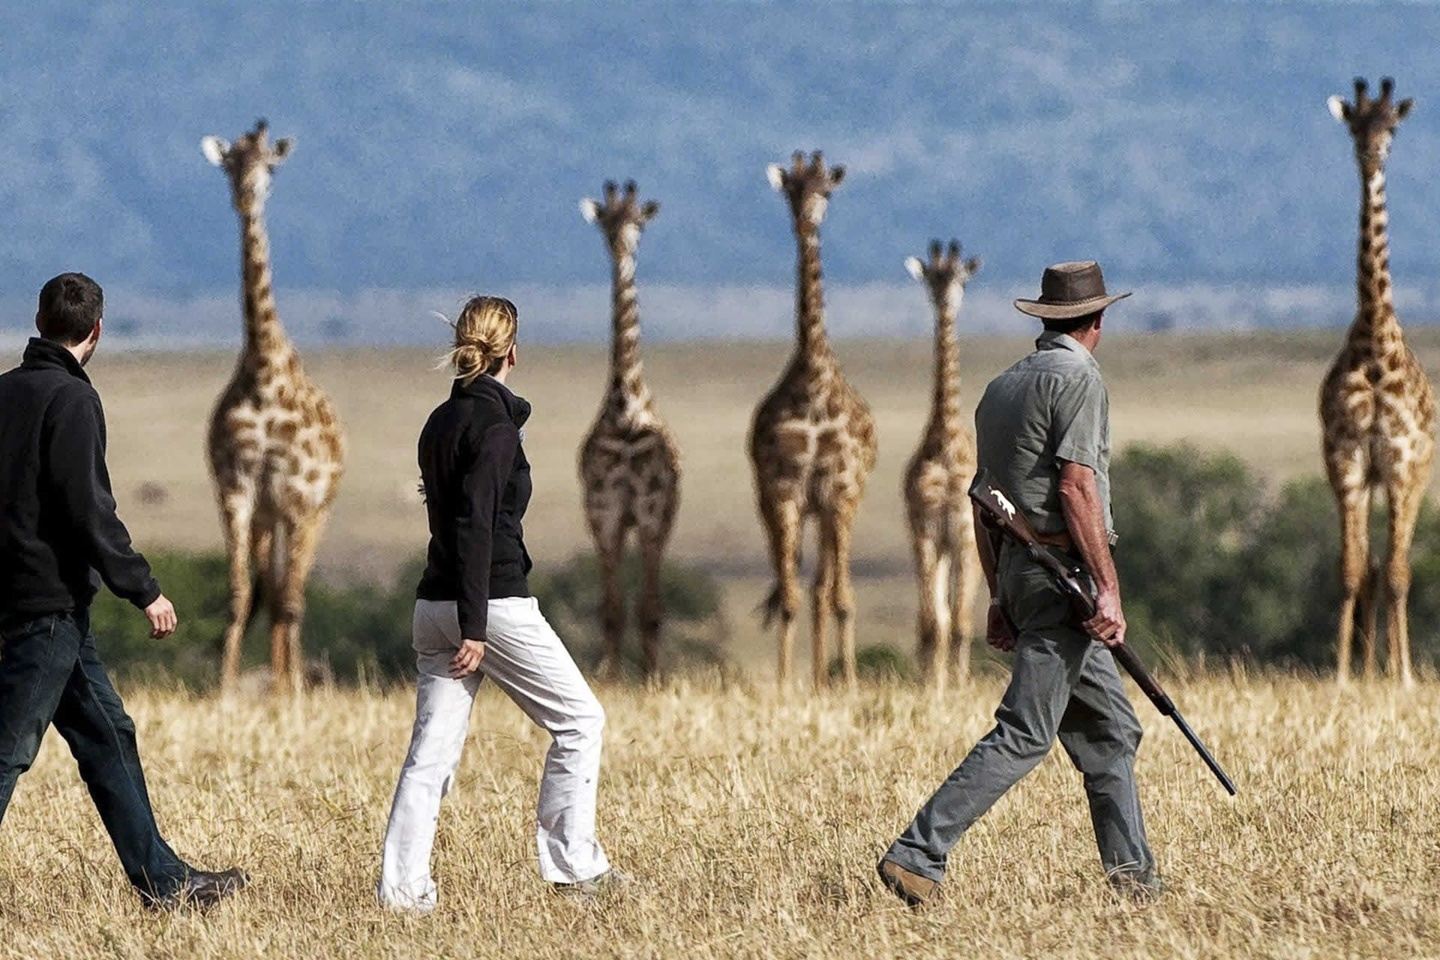 One day safari in Arusha National Park - Walking & game drives